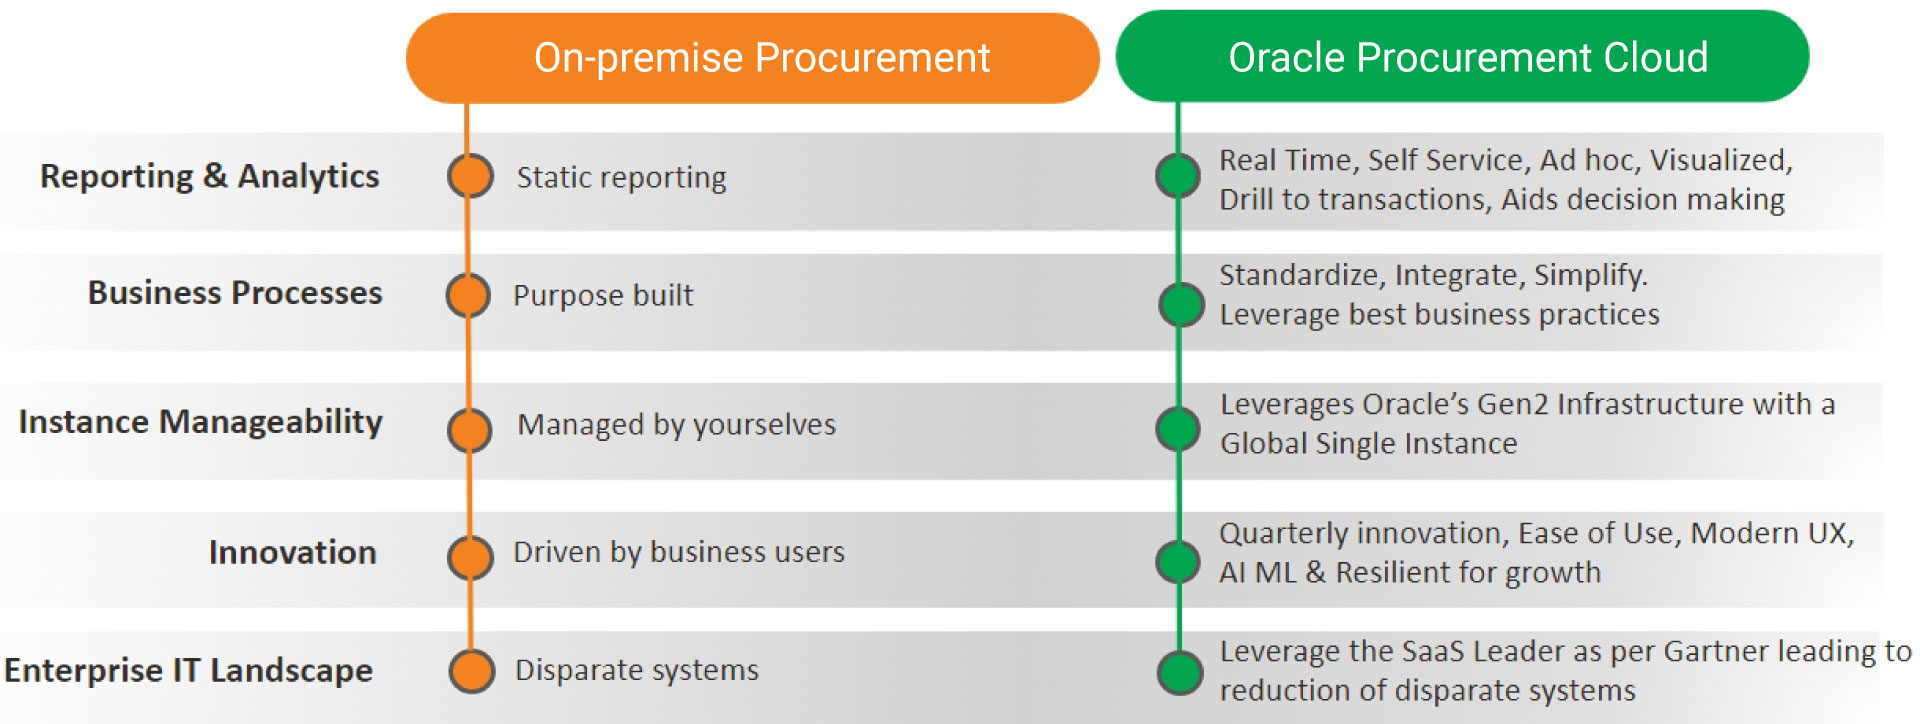 Current State Vs. Target State with Oracle Procurement Cloud